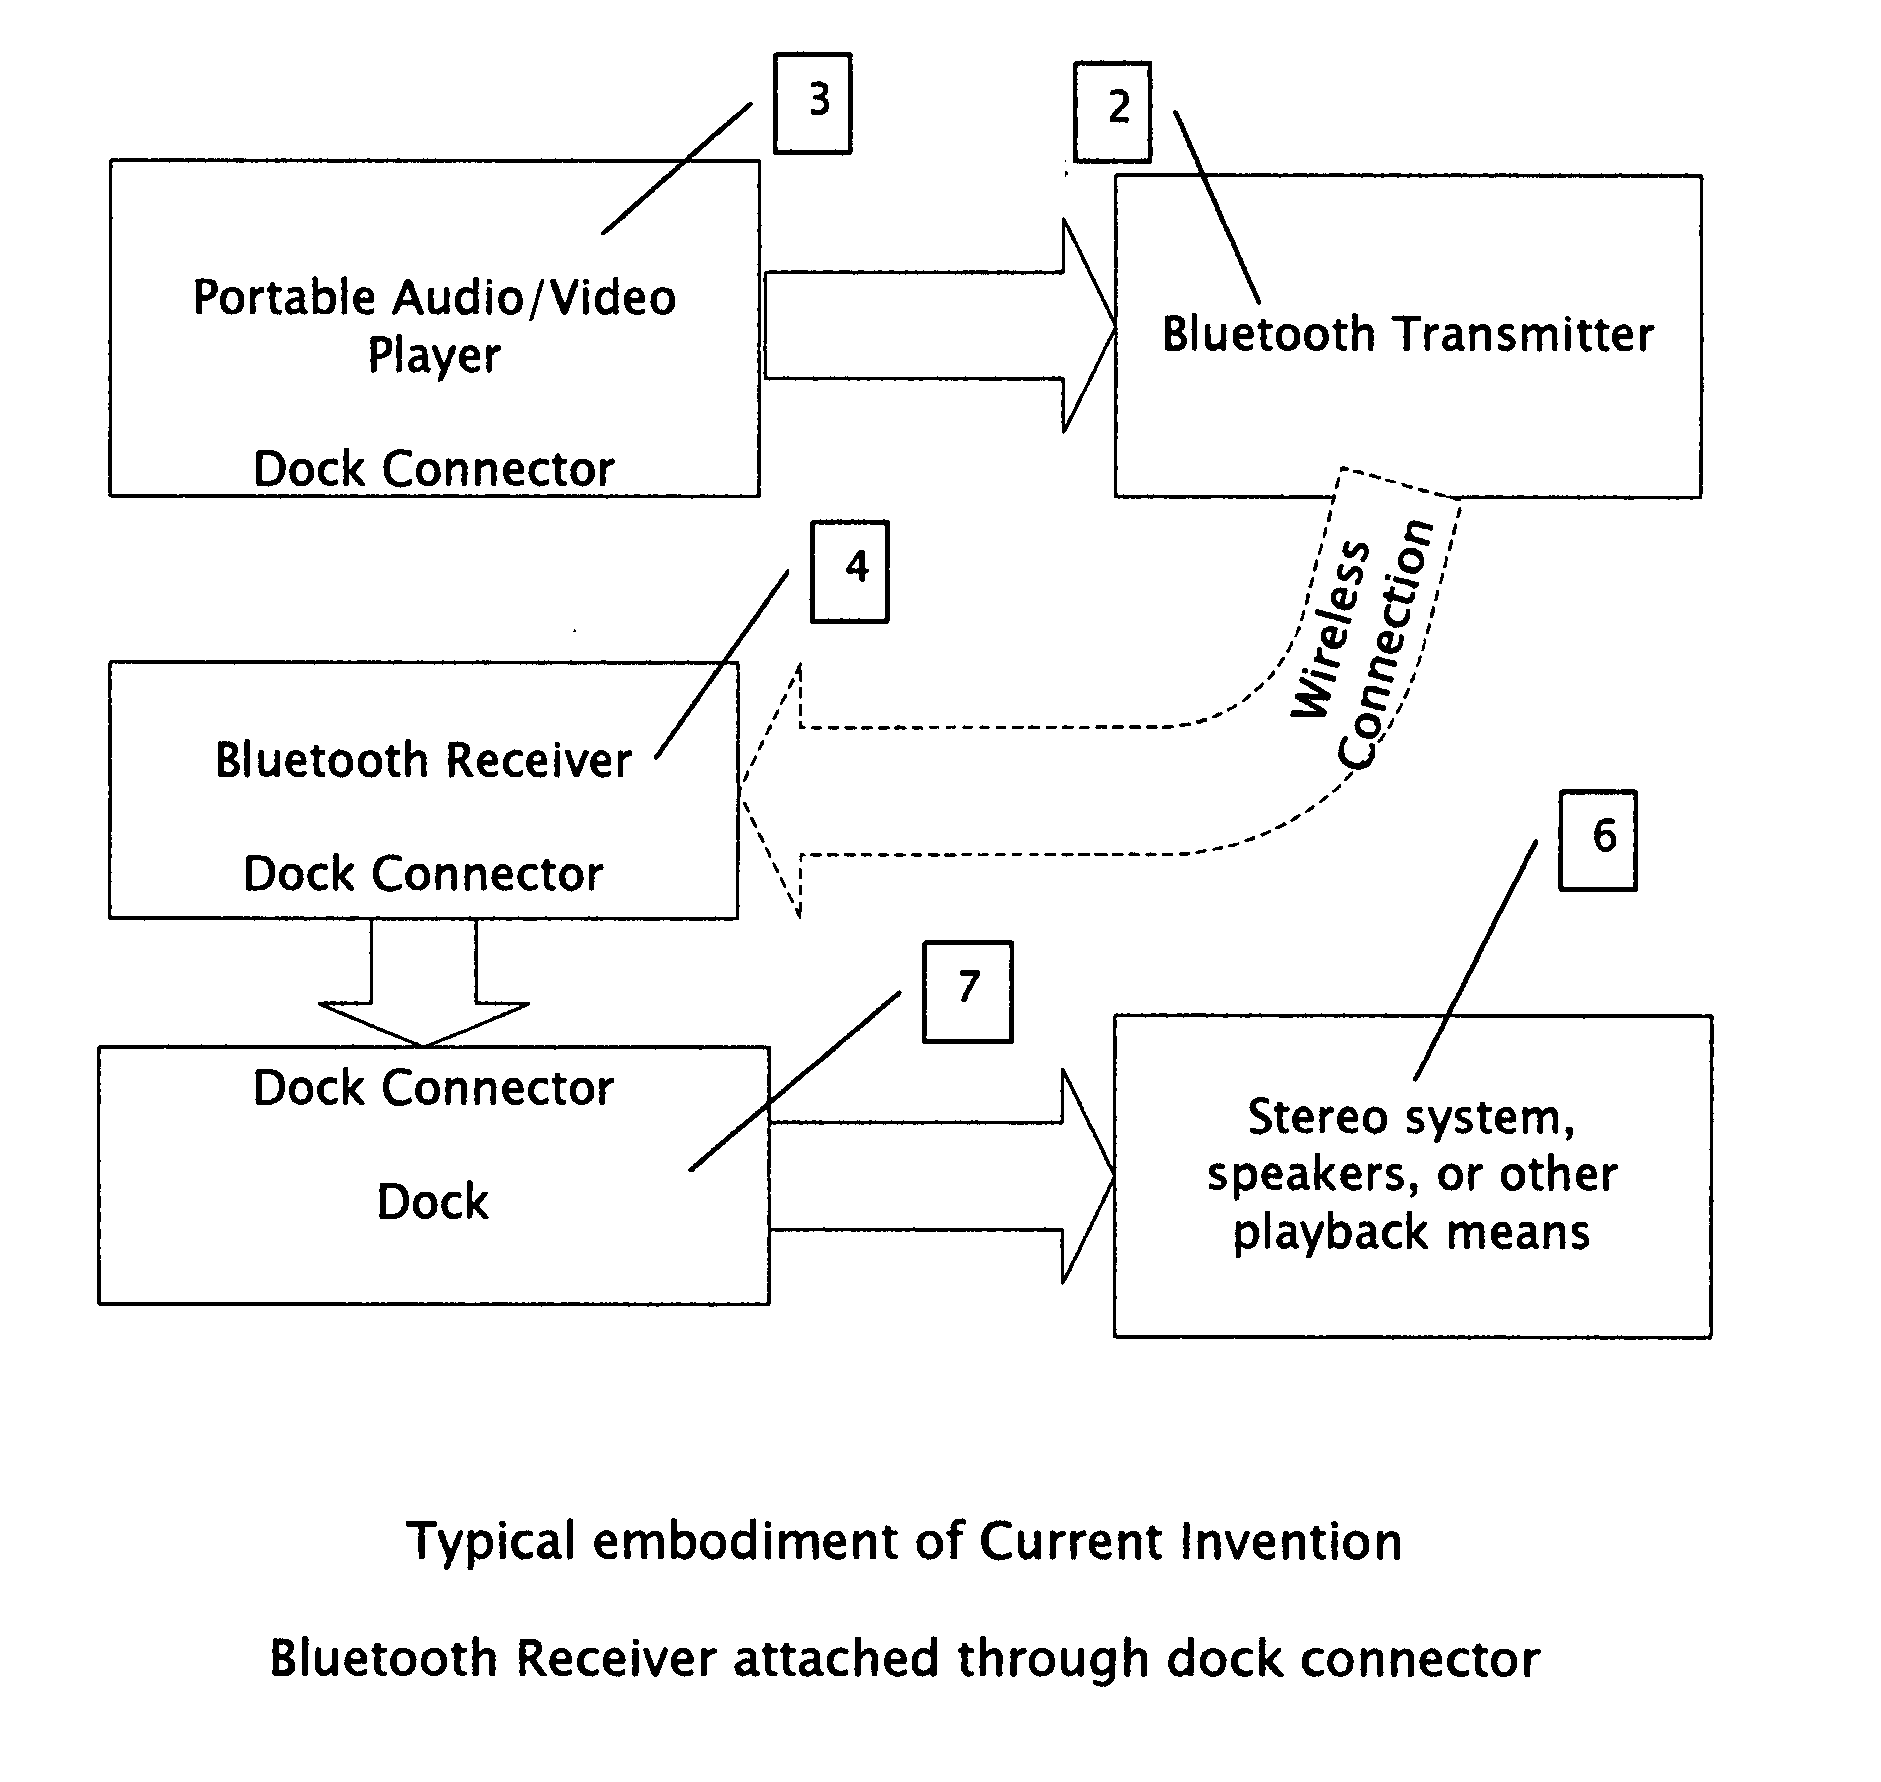 Method of wireless conversion by emulation of a non-wireless device